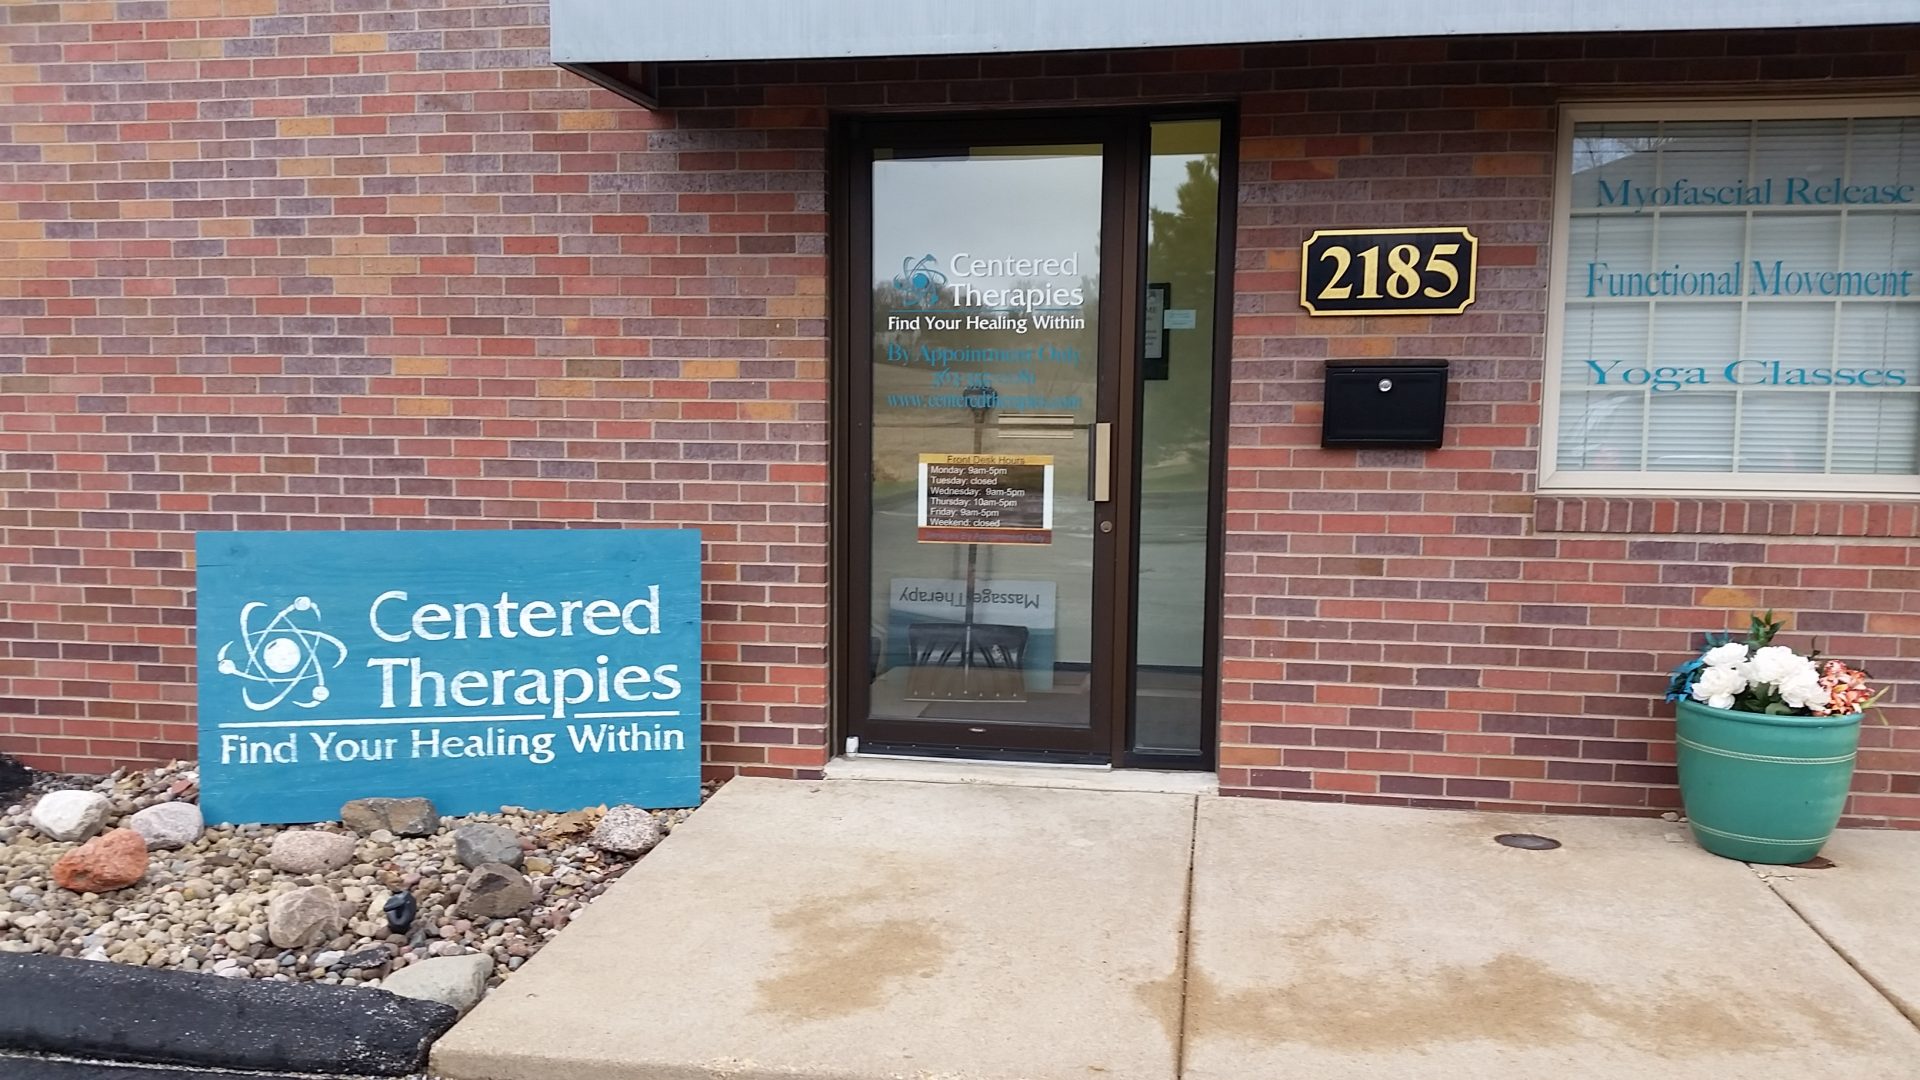 Centered Therapies